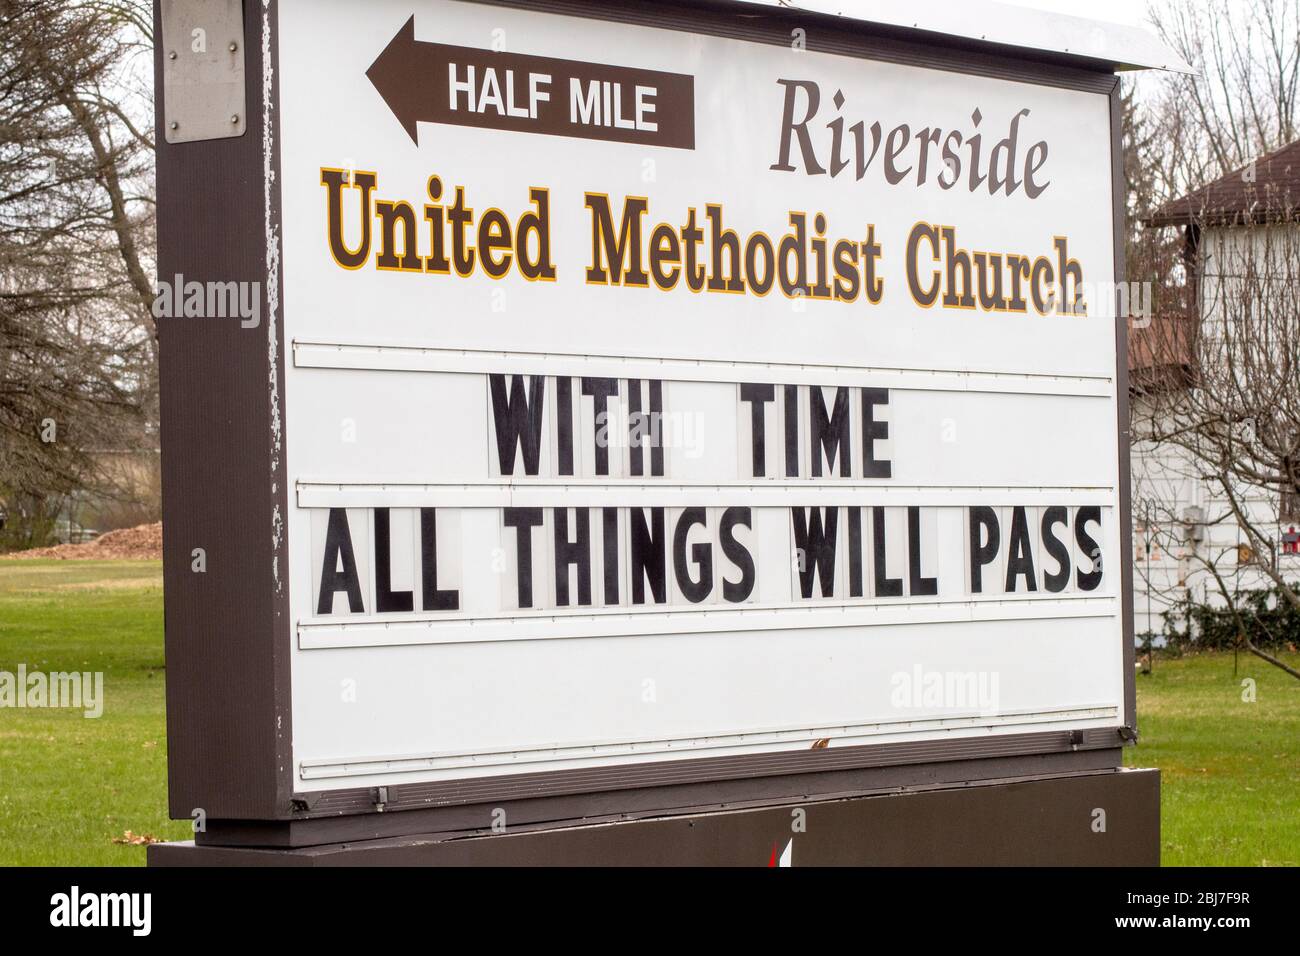 Uplifting church message on a sign during the corona virus scare Stock Photo